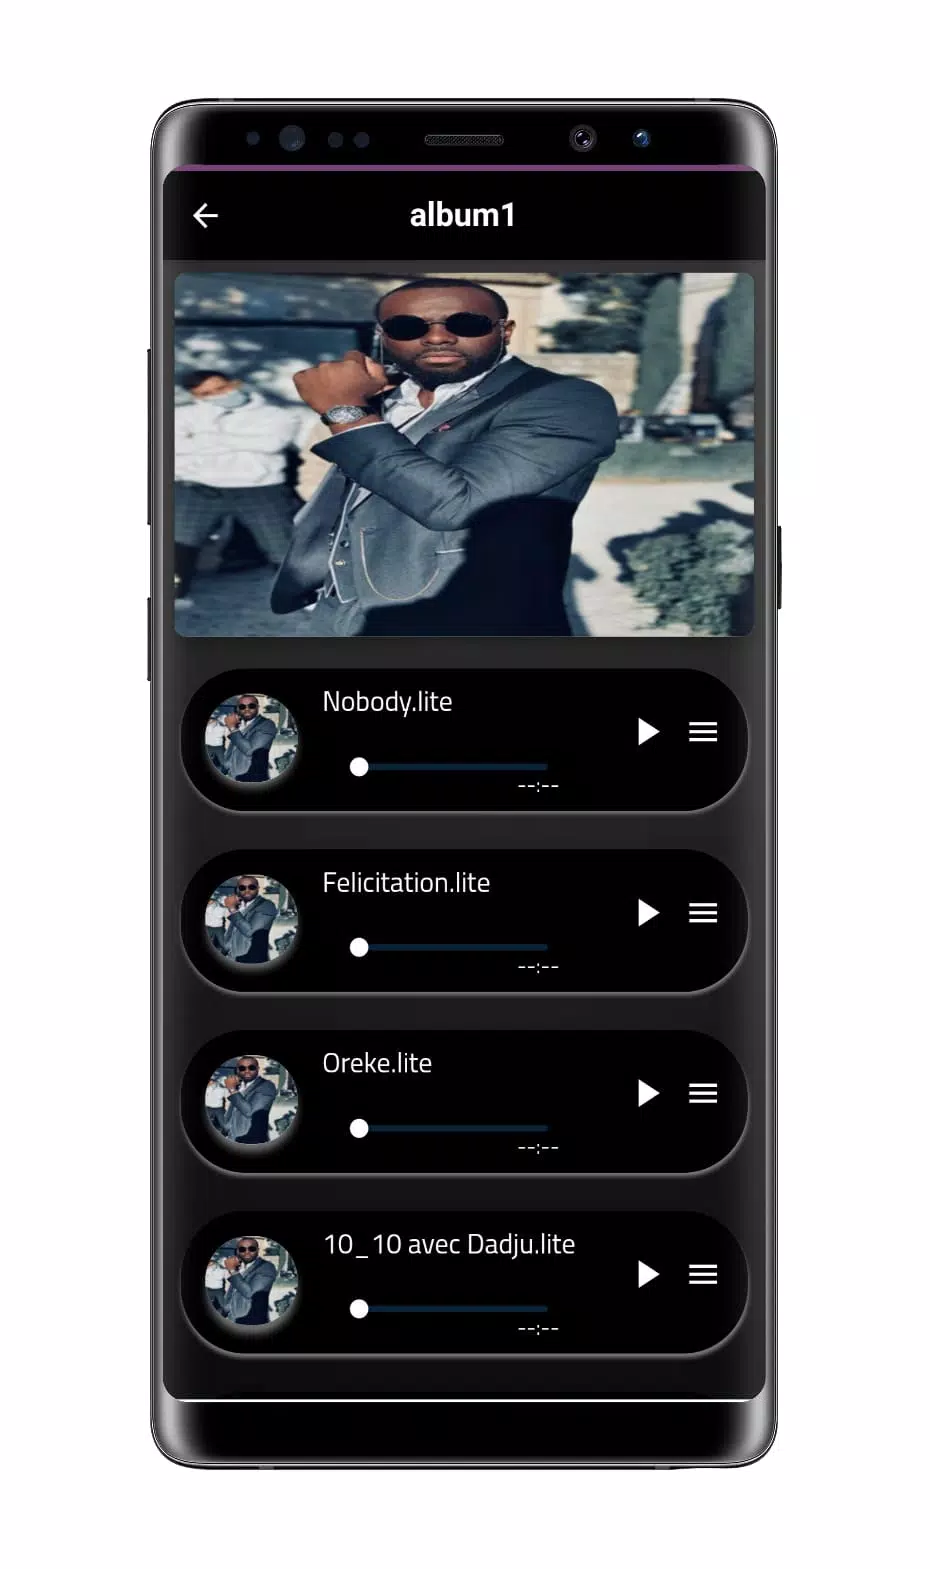 Maître Gims 200 Chansons MP3 APK for Android Download